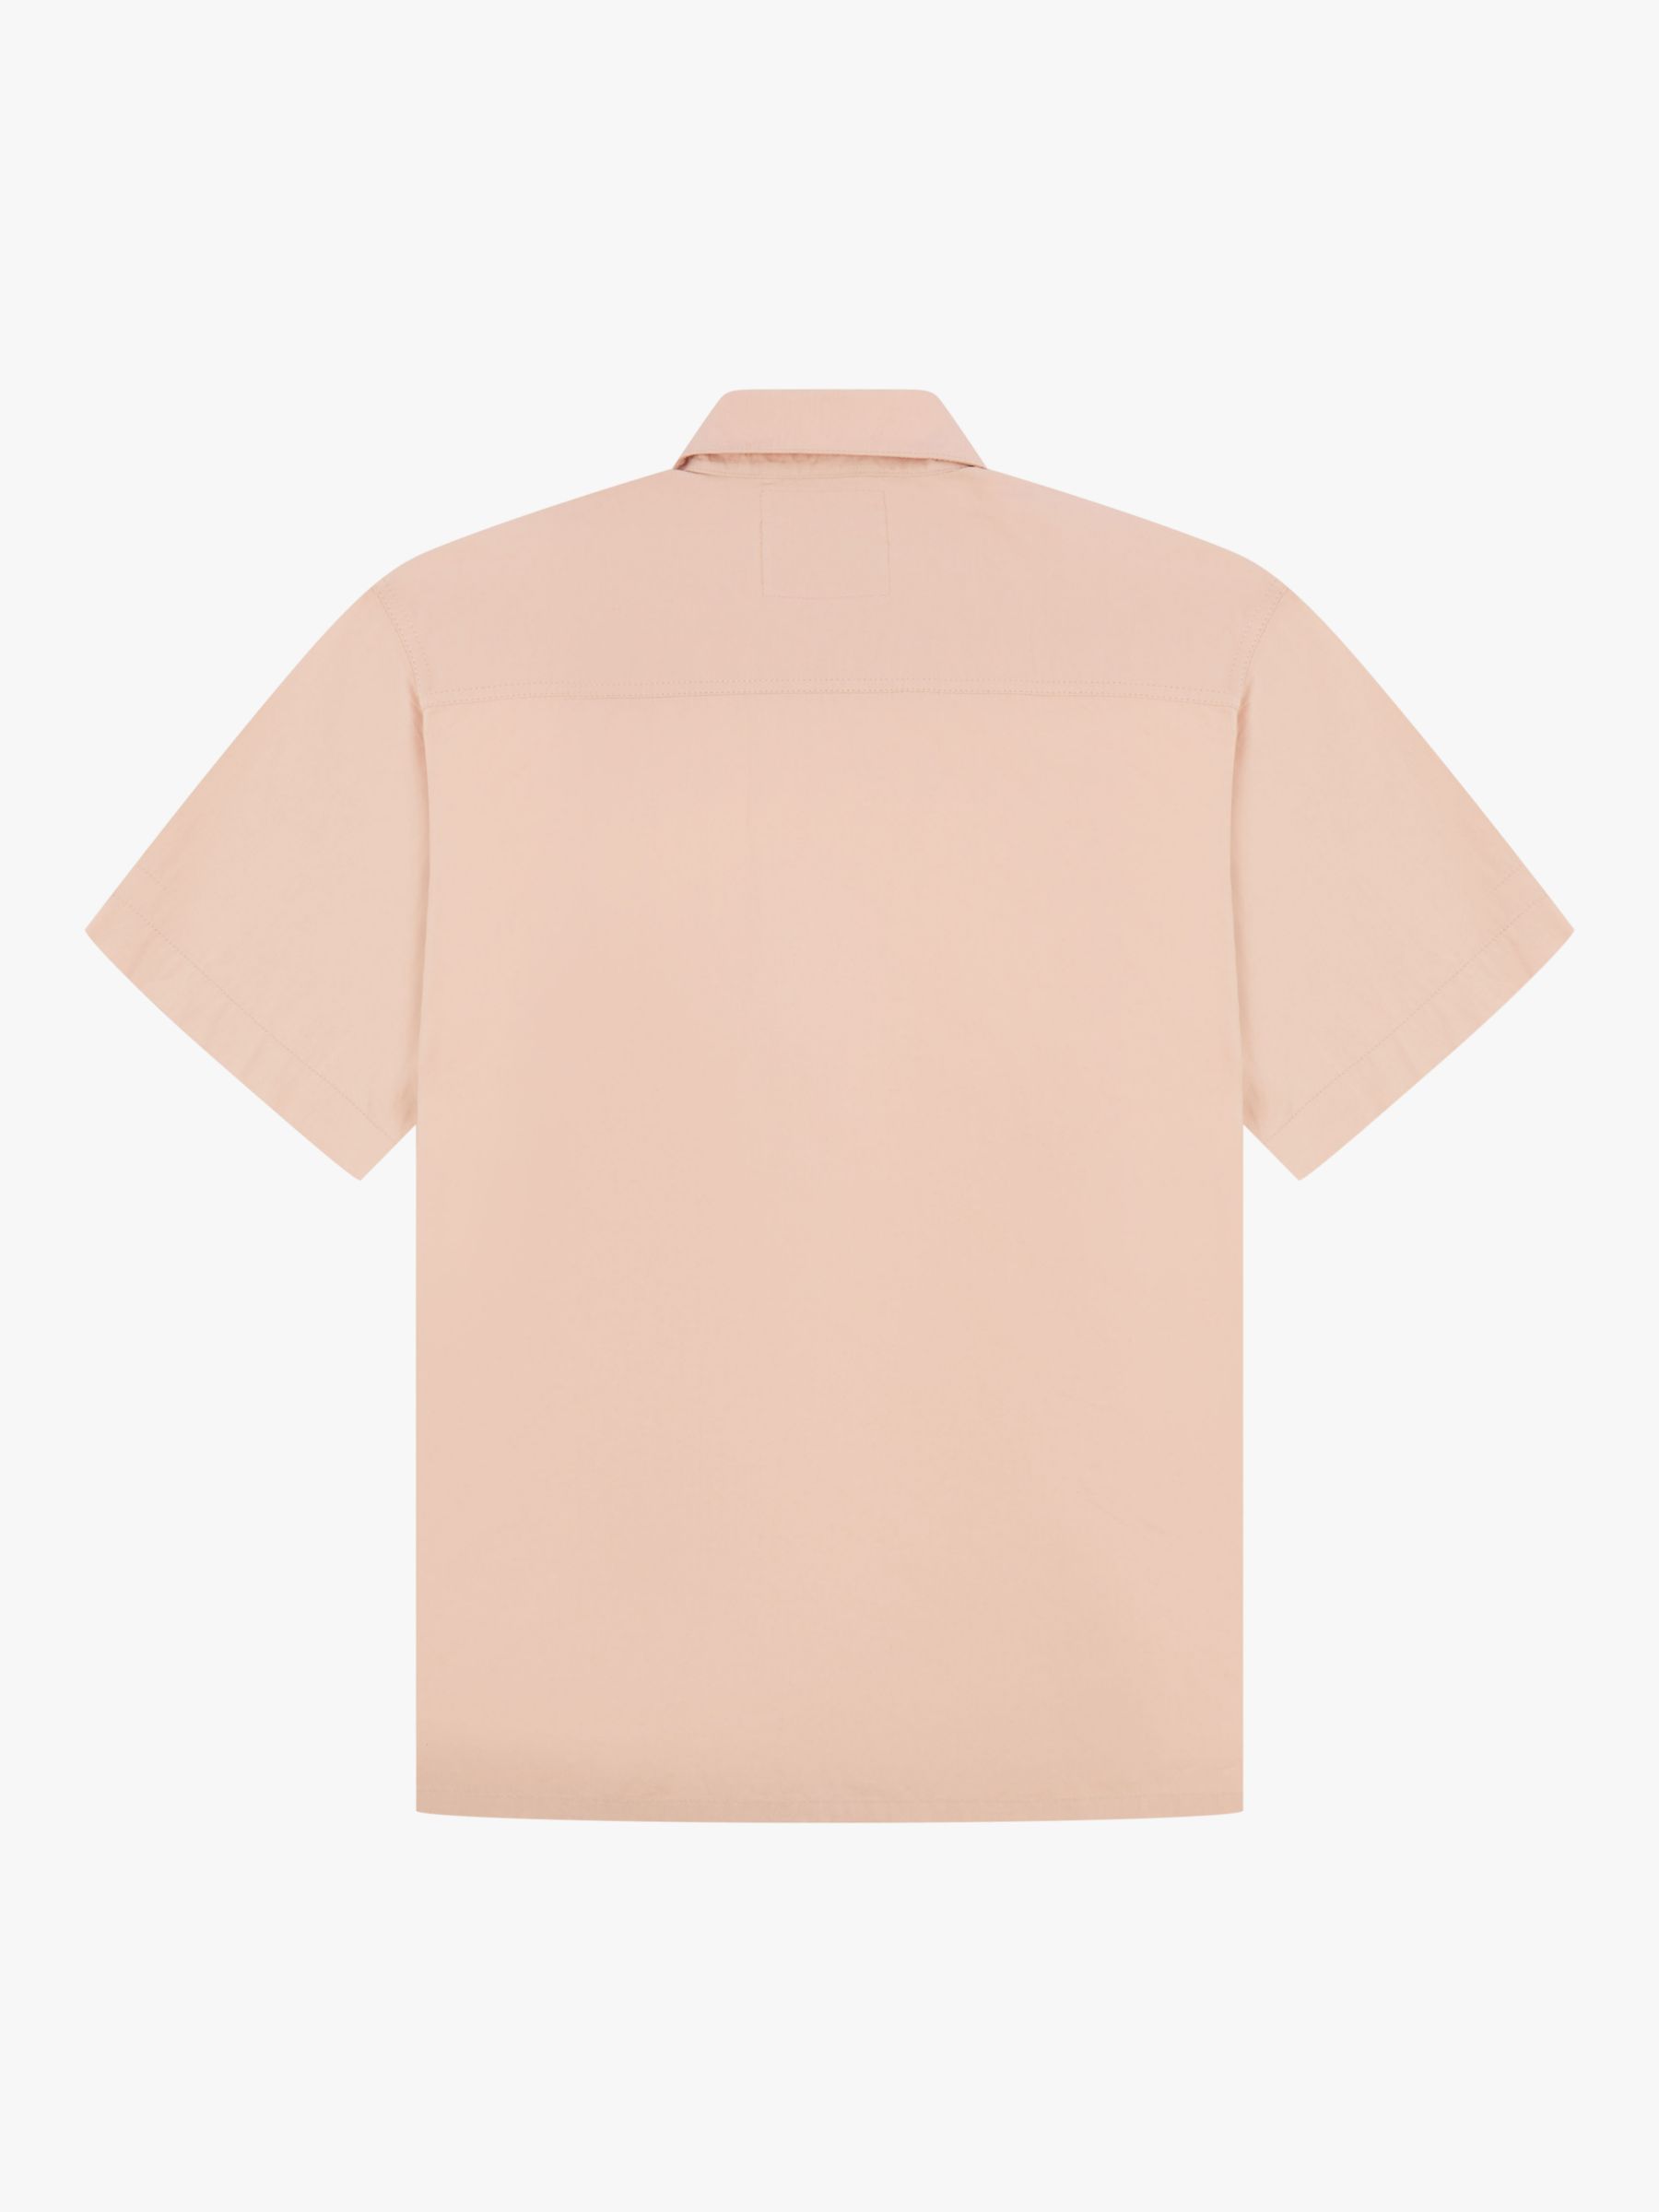 Uskees Short Sleeve Cotton Shirt, Dusty Pink, M